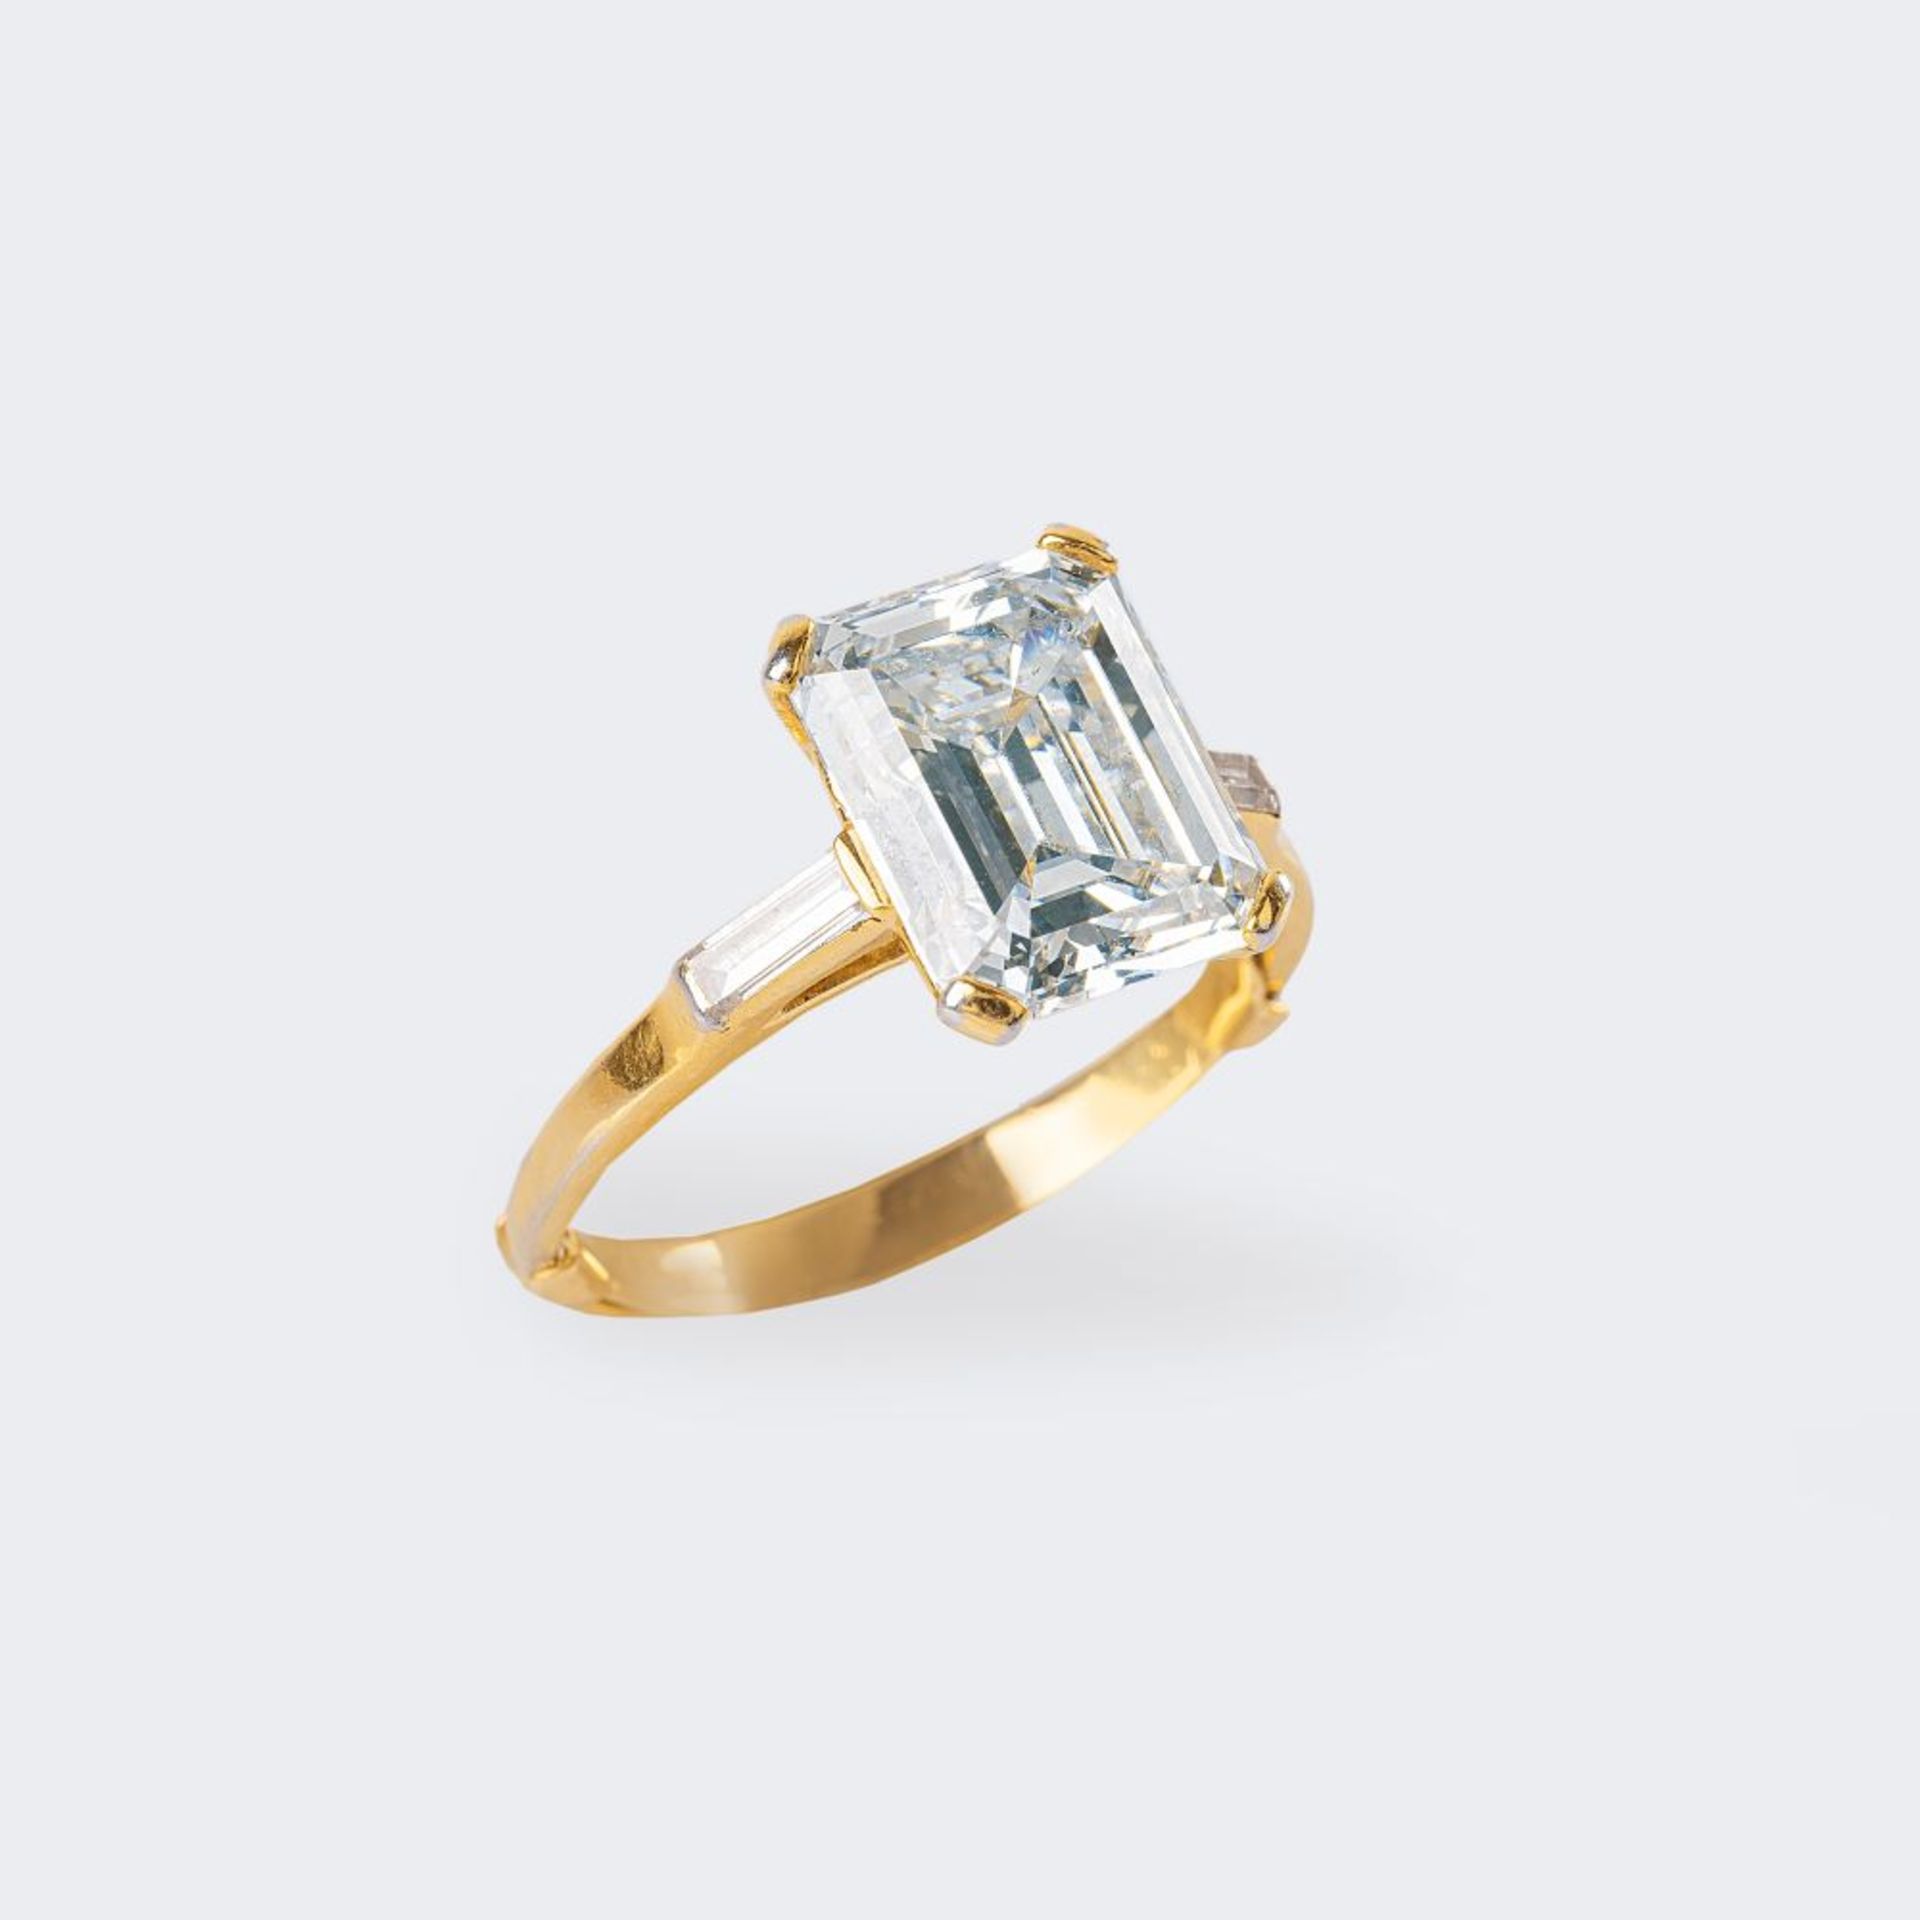 An exceptional, highcarat River Diamond Ring in Emerald Cut. - Image 2 of 2